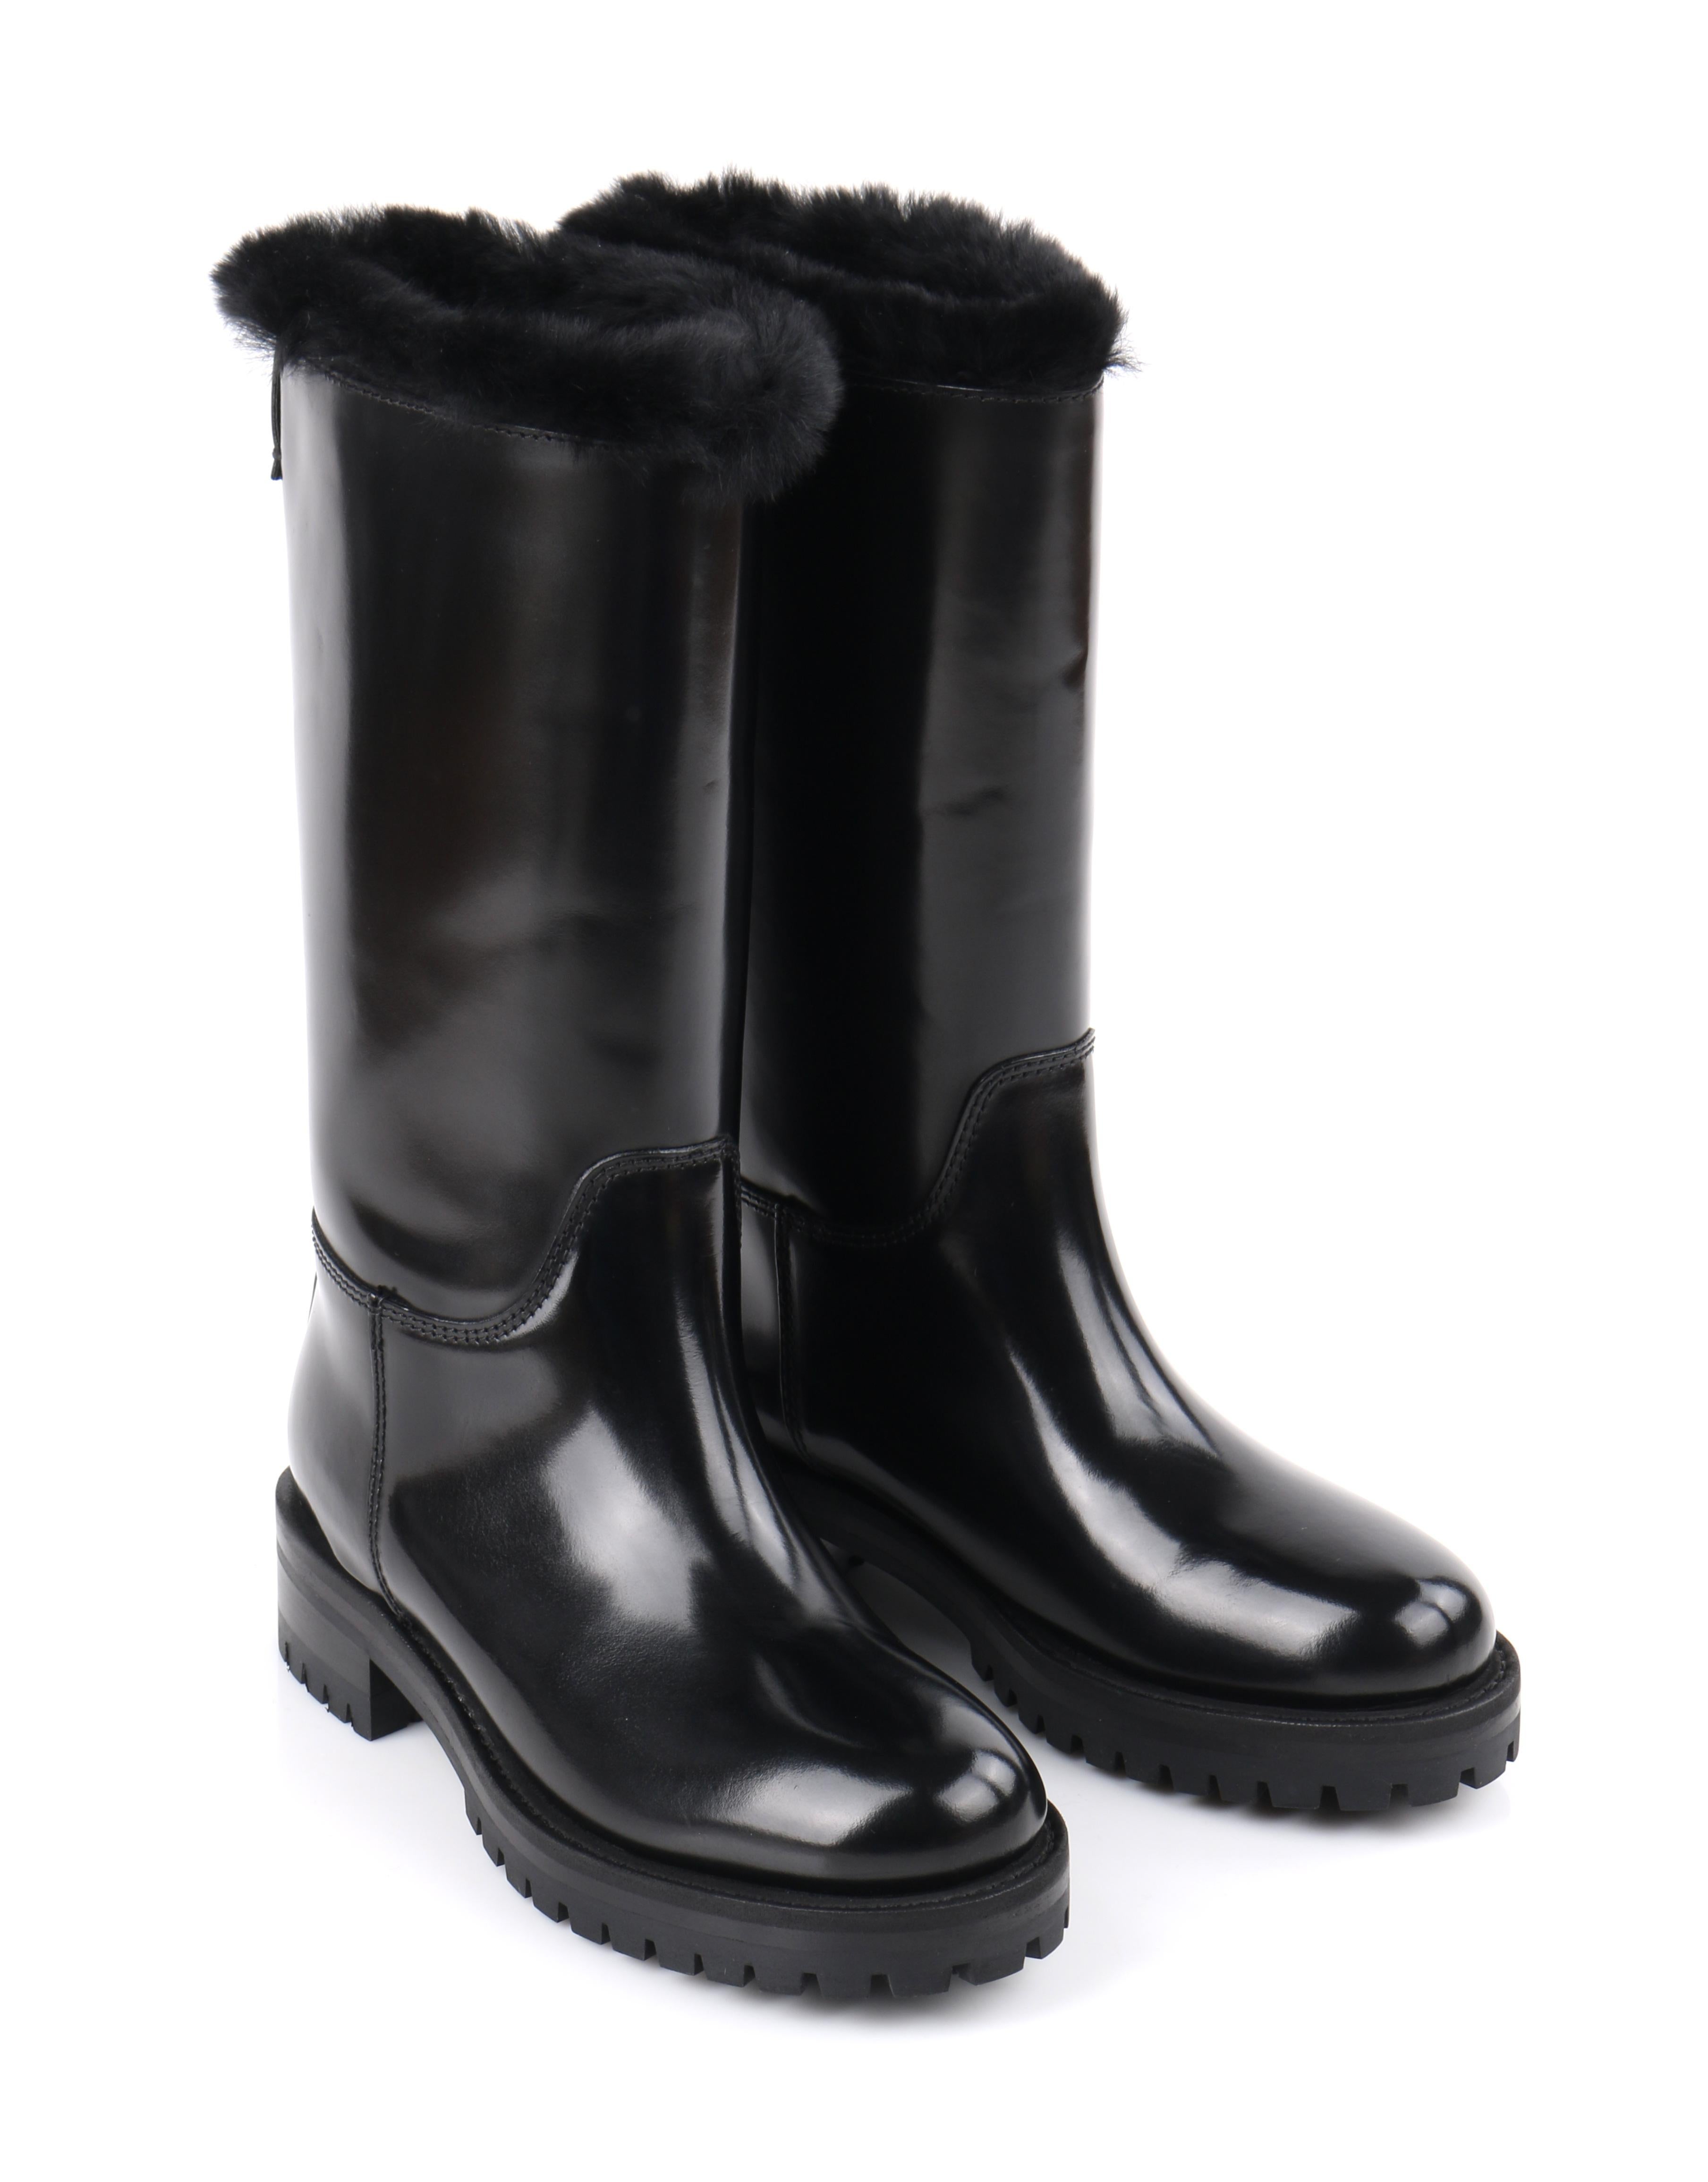 DOLCE & GABBANA Black Leather Lapin Fur Lined Calf High Moto Cold Weather Boots In New Condition For Sale In Thiensville, WI